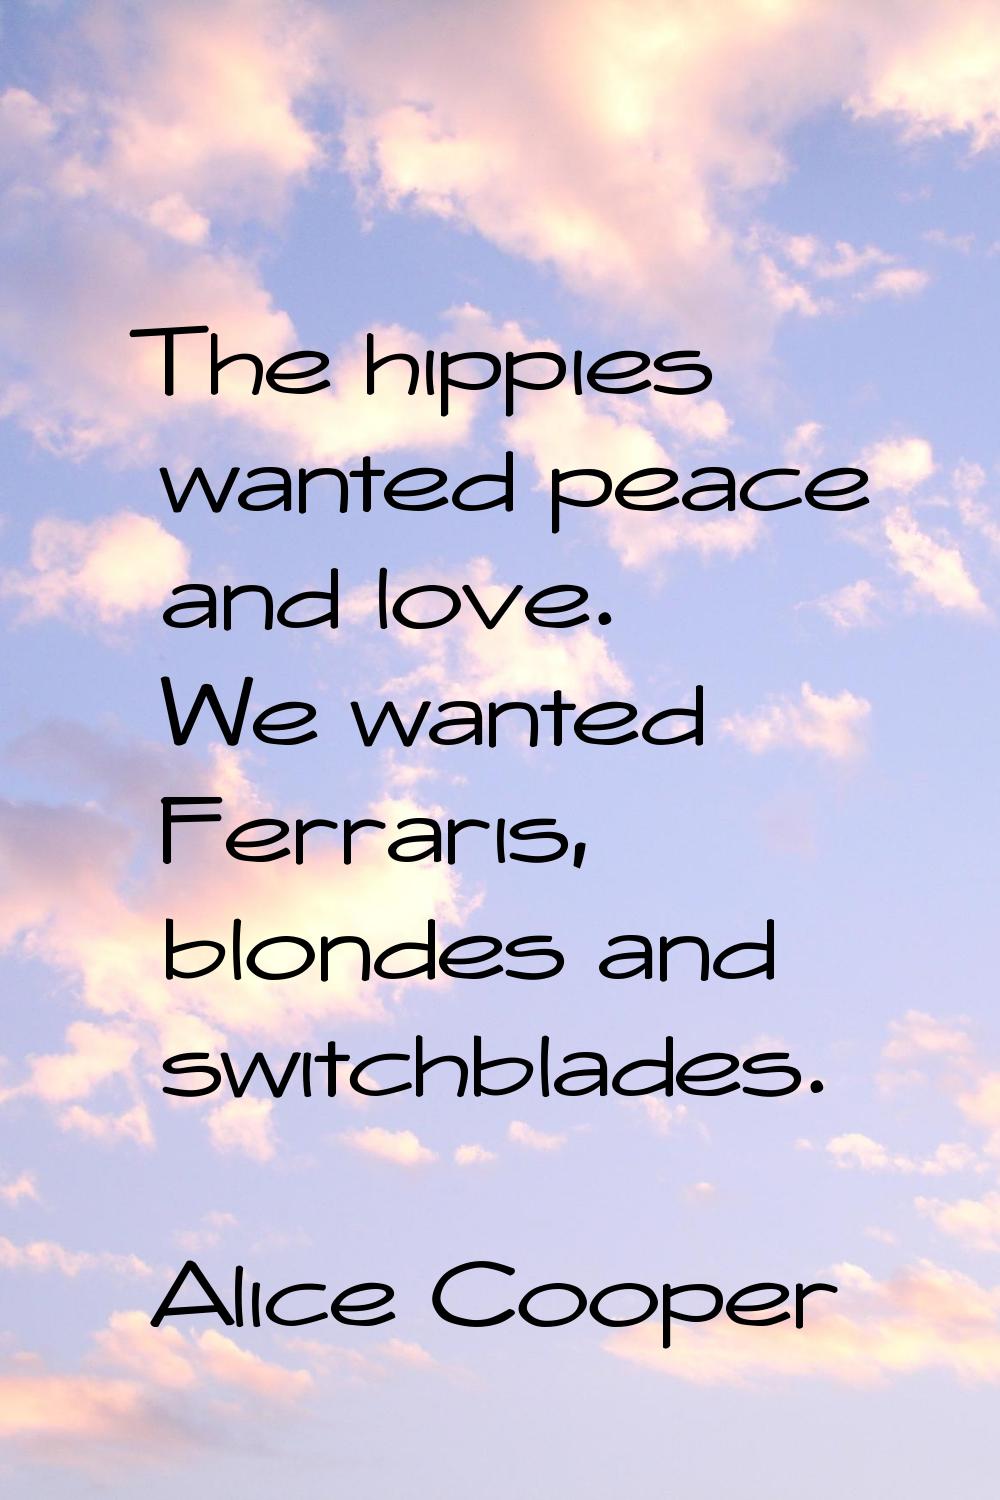 The hippies wanted peace and love. We wanted Ferraris, blondes and switchblades.